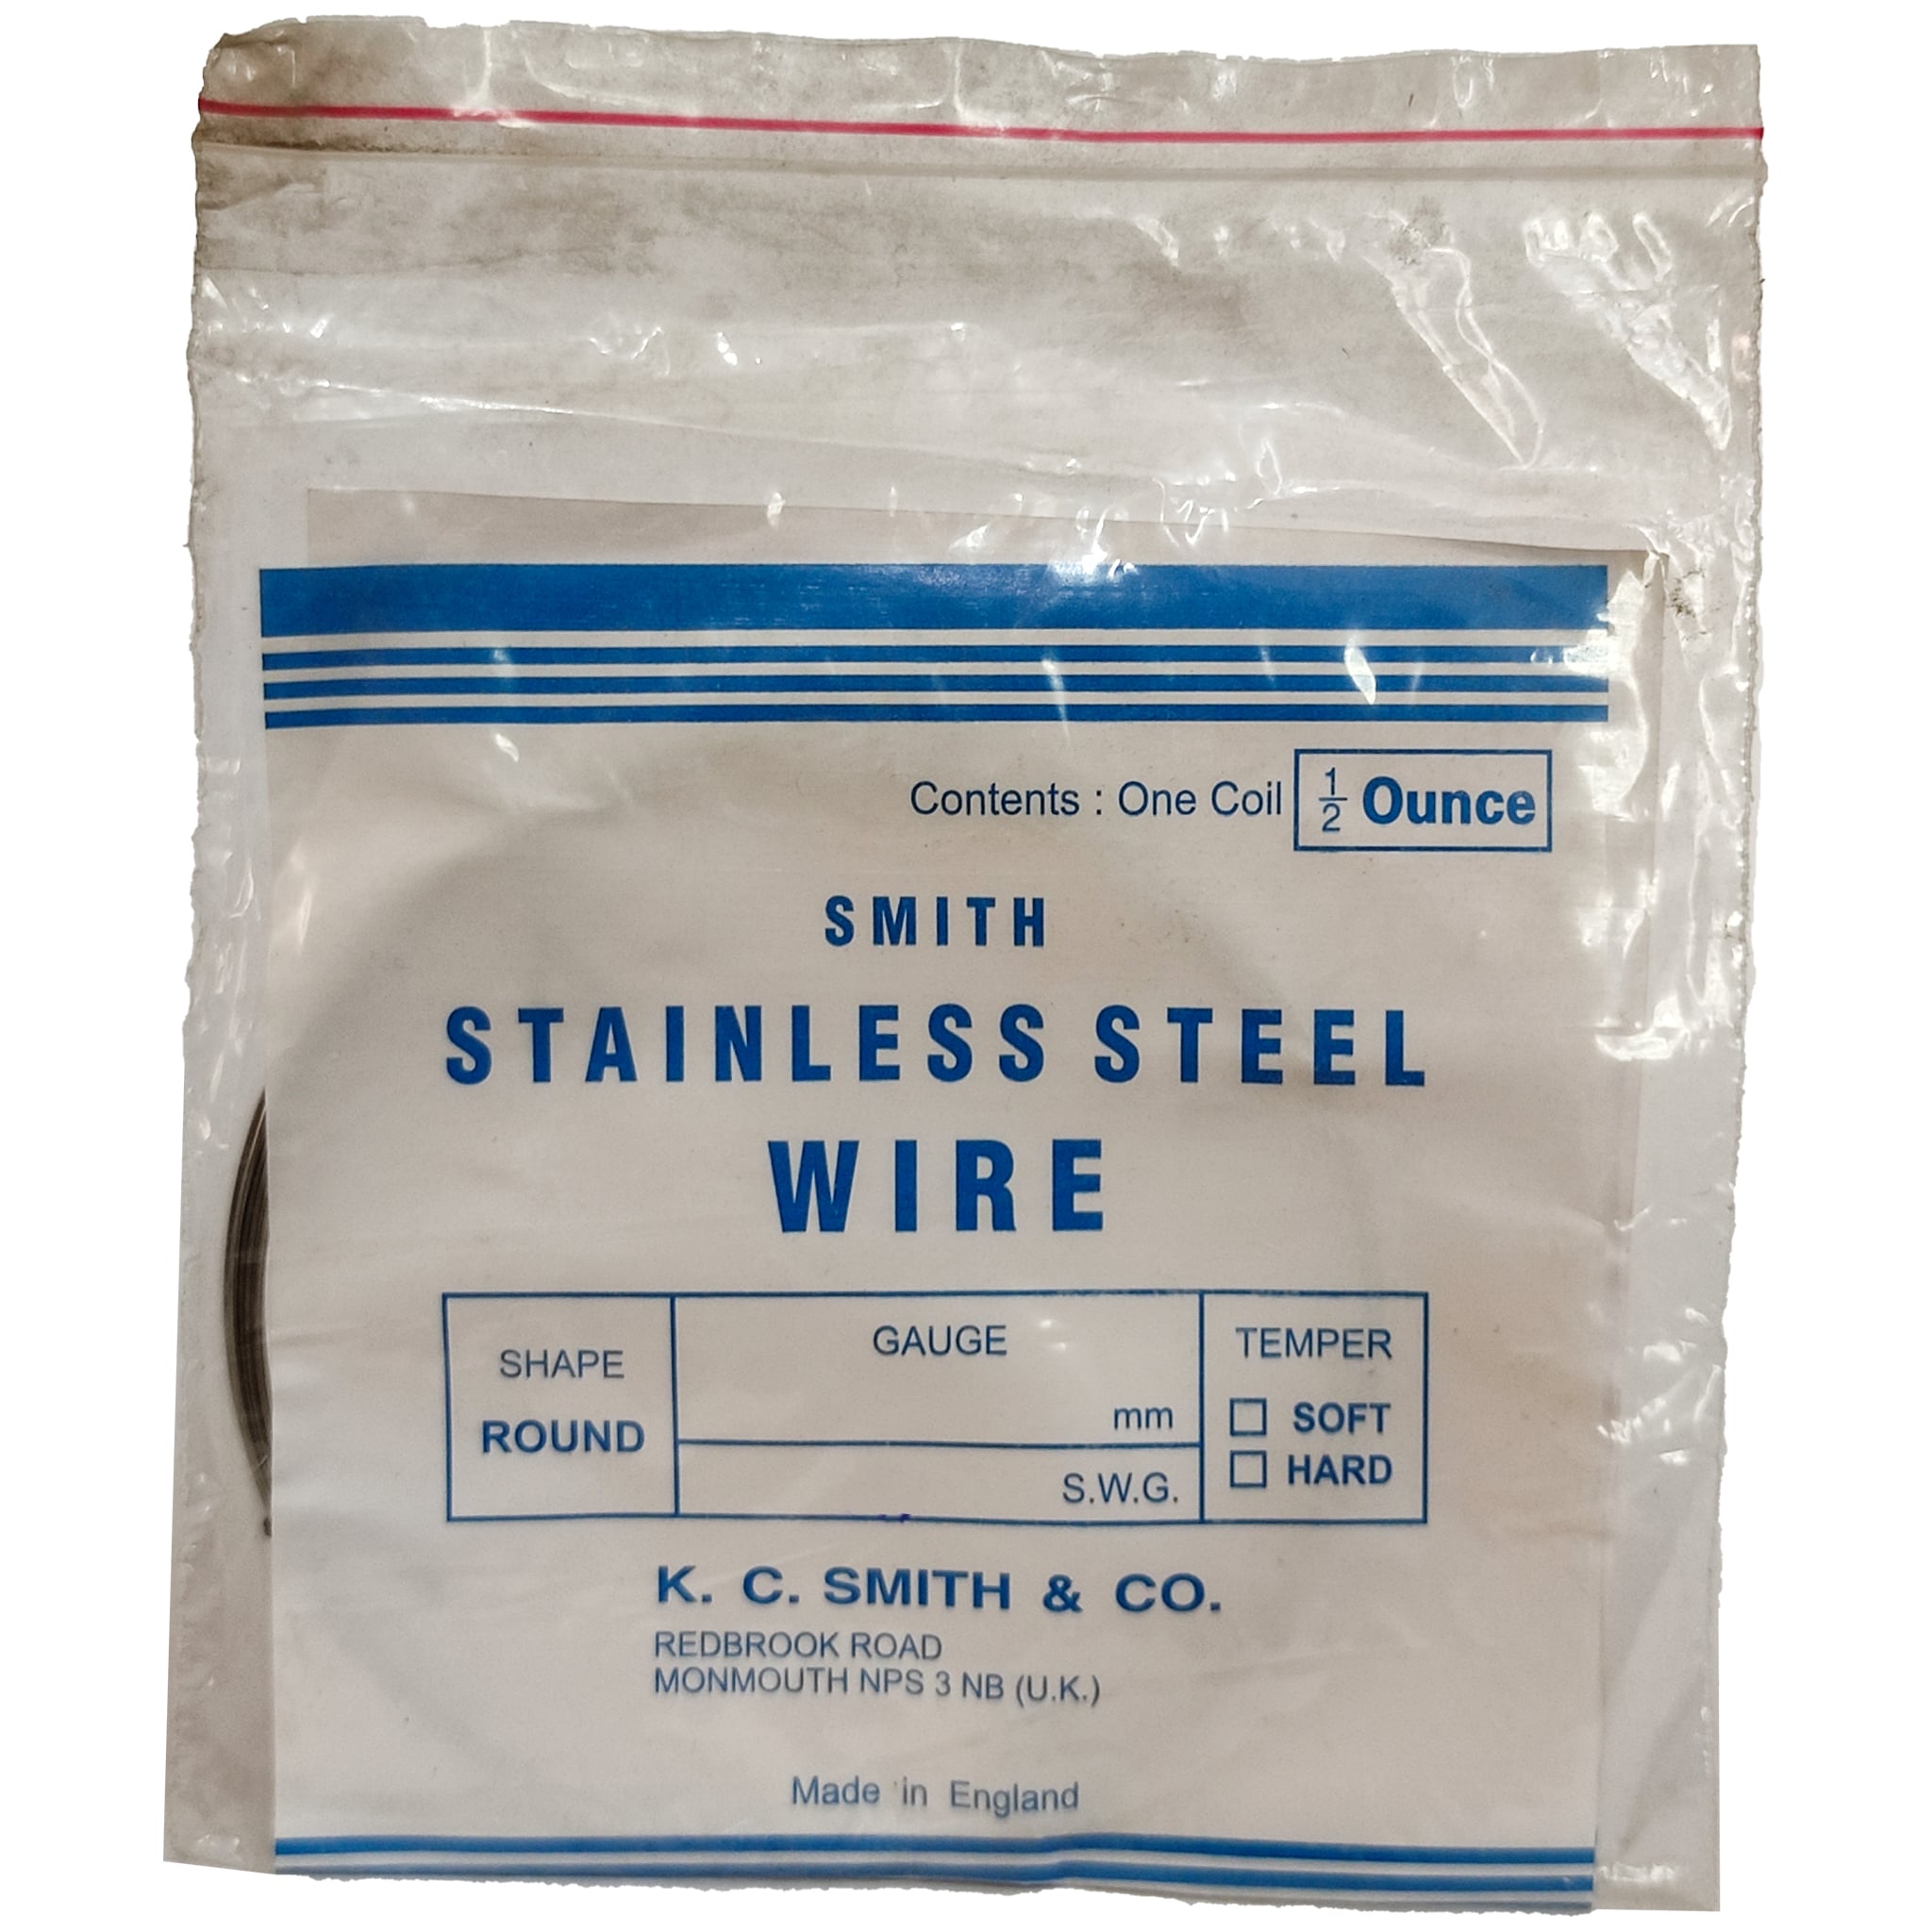 Smith Stainless Steel Wire